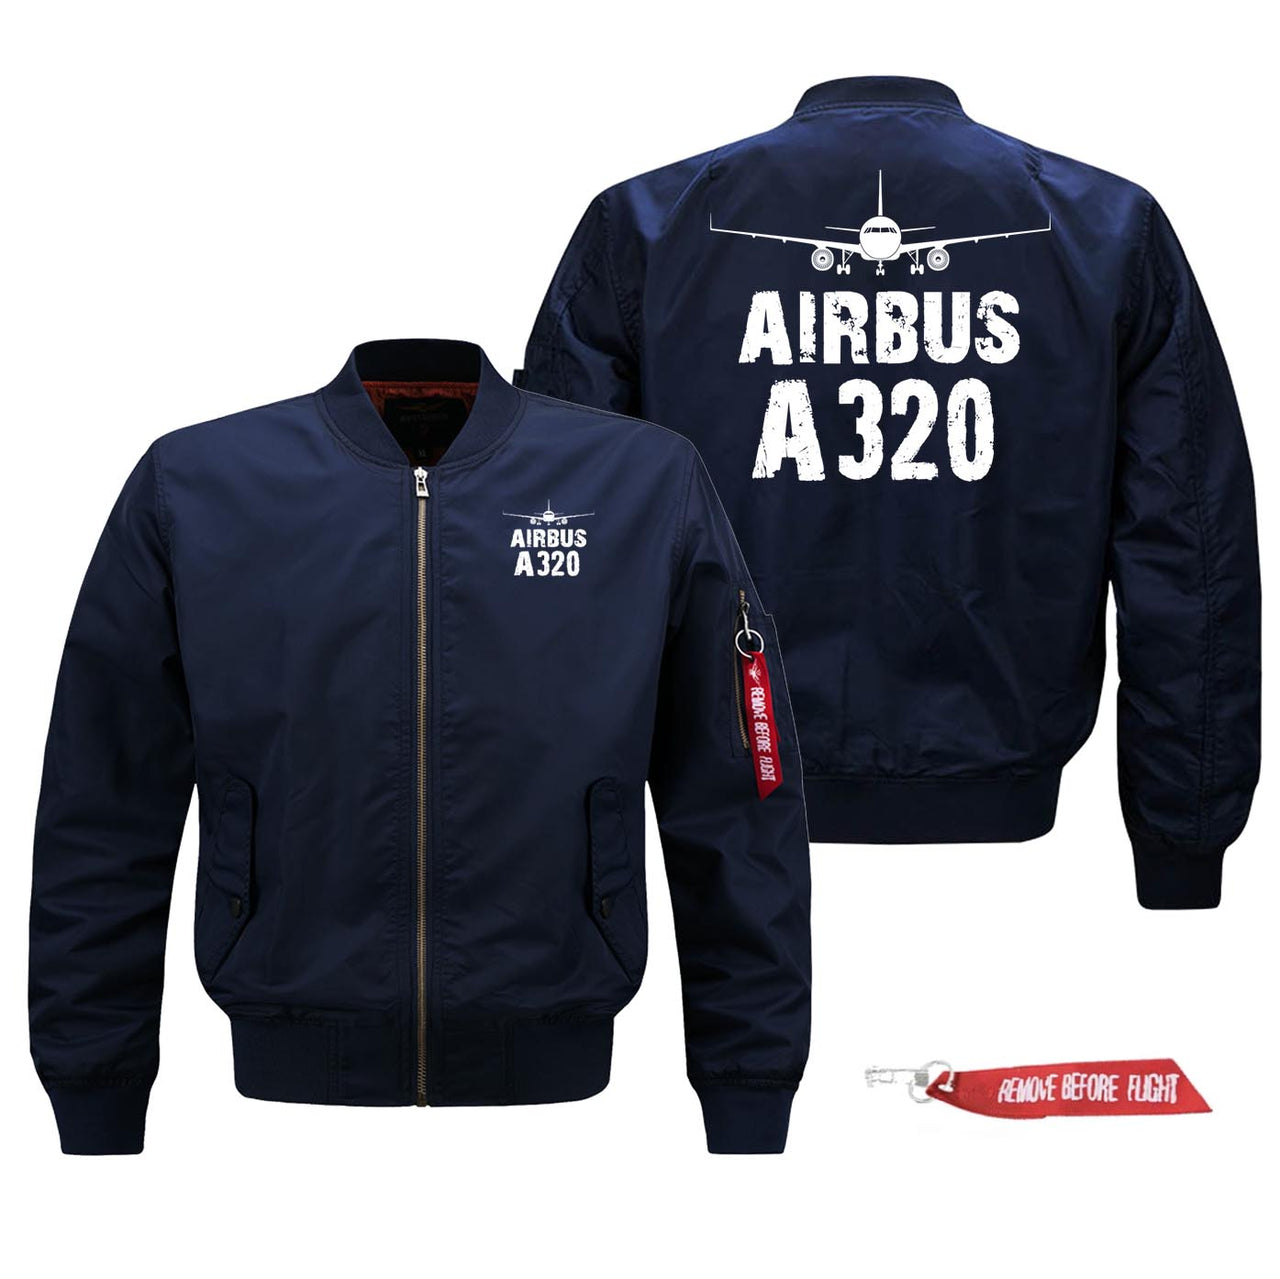 Airbus A320 Silhouette & Designed Pilot Jackets (Customizable)